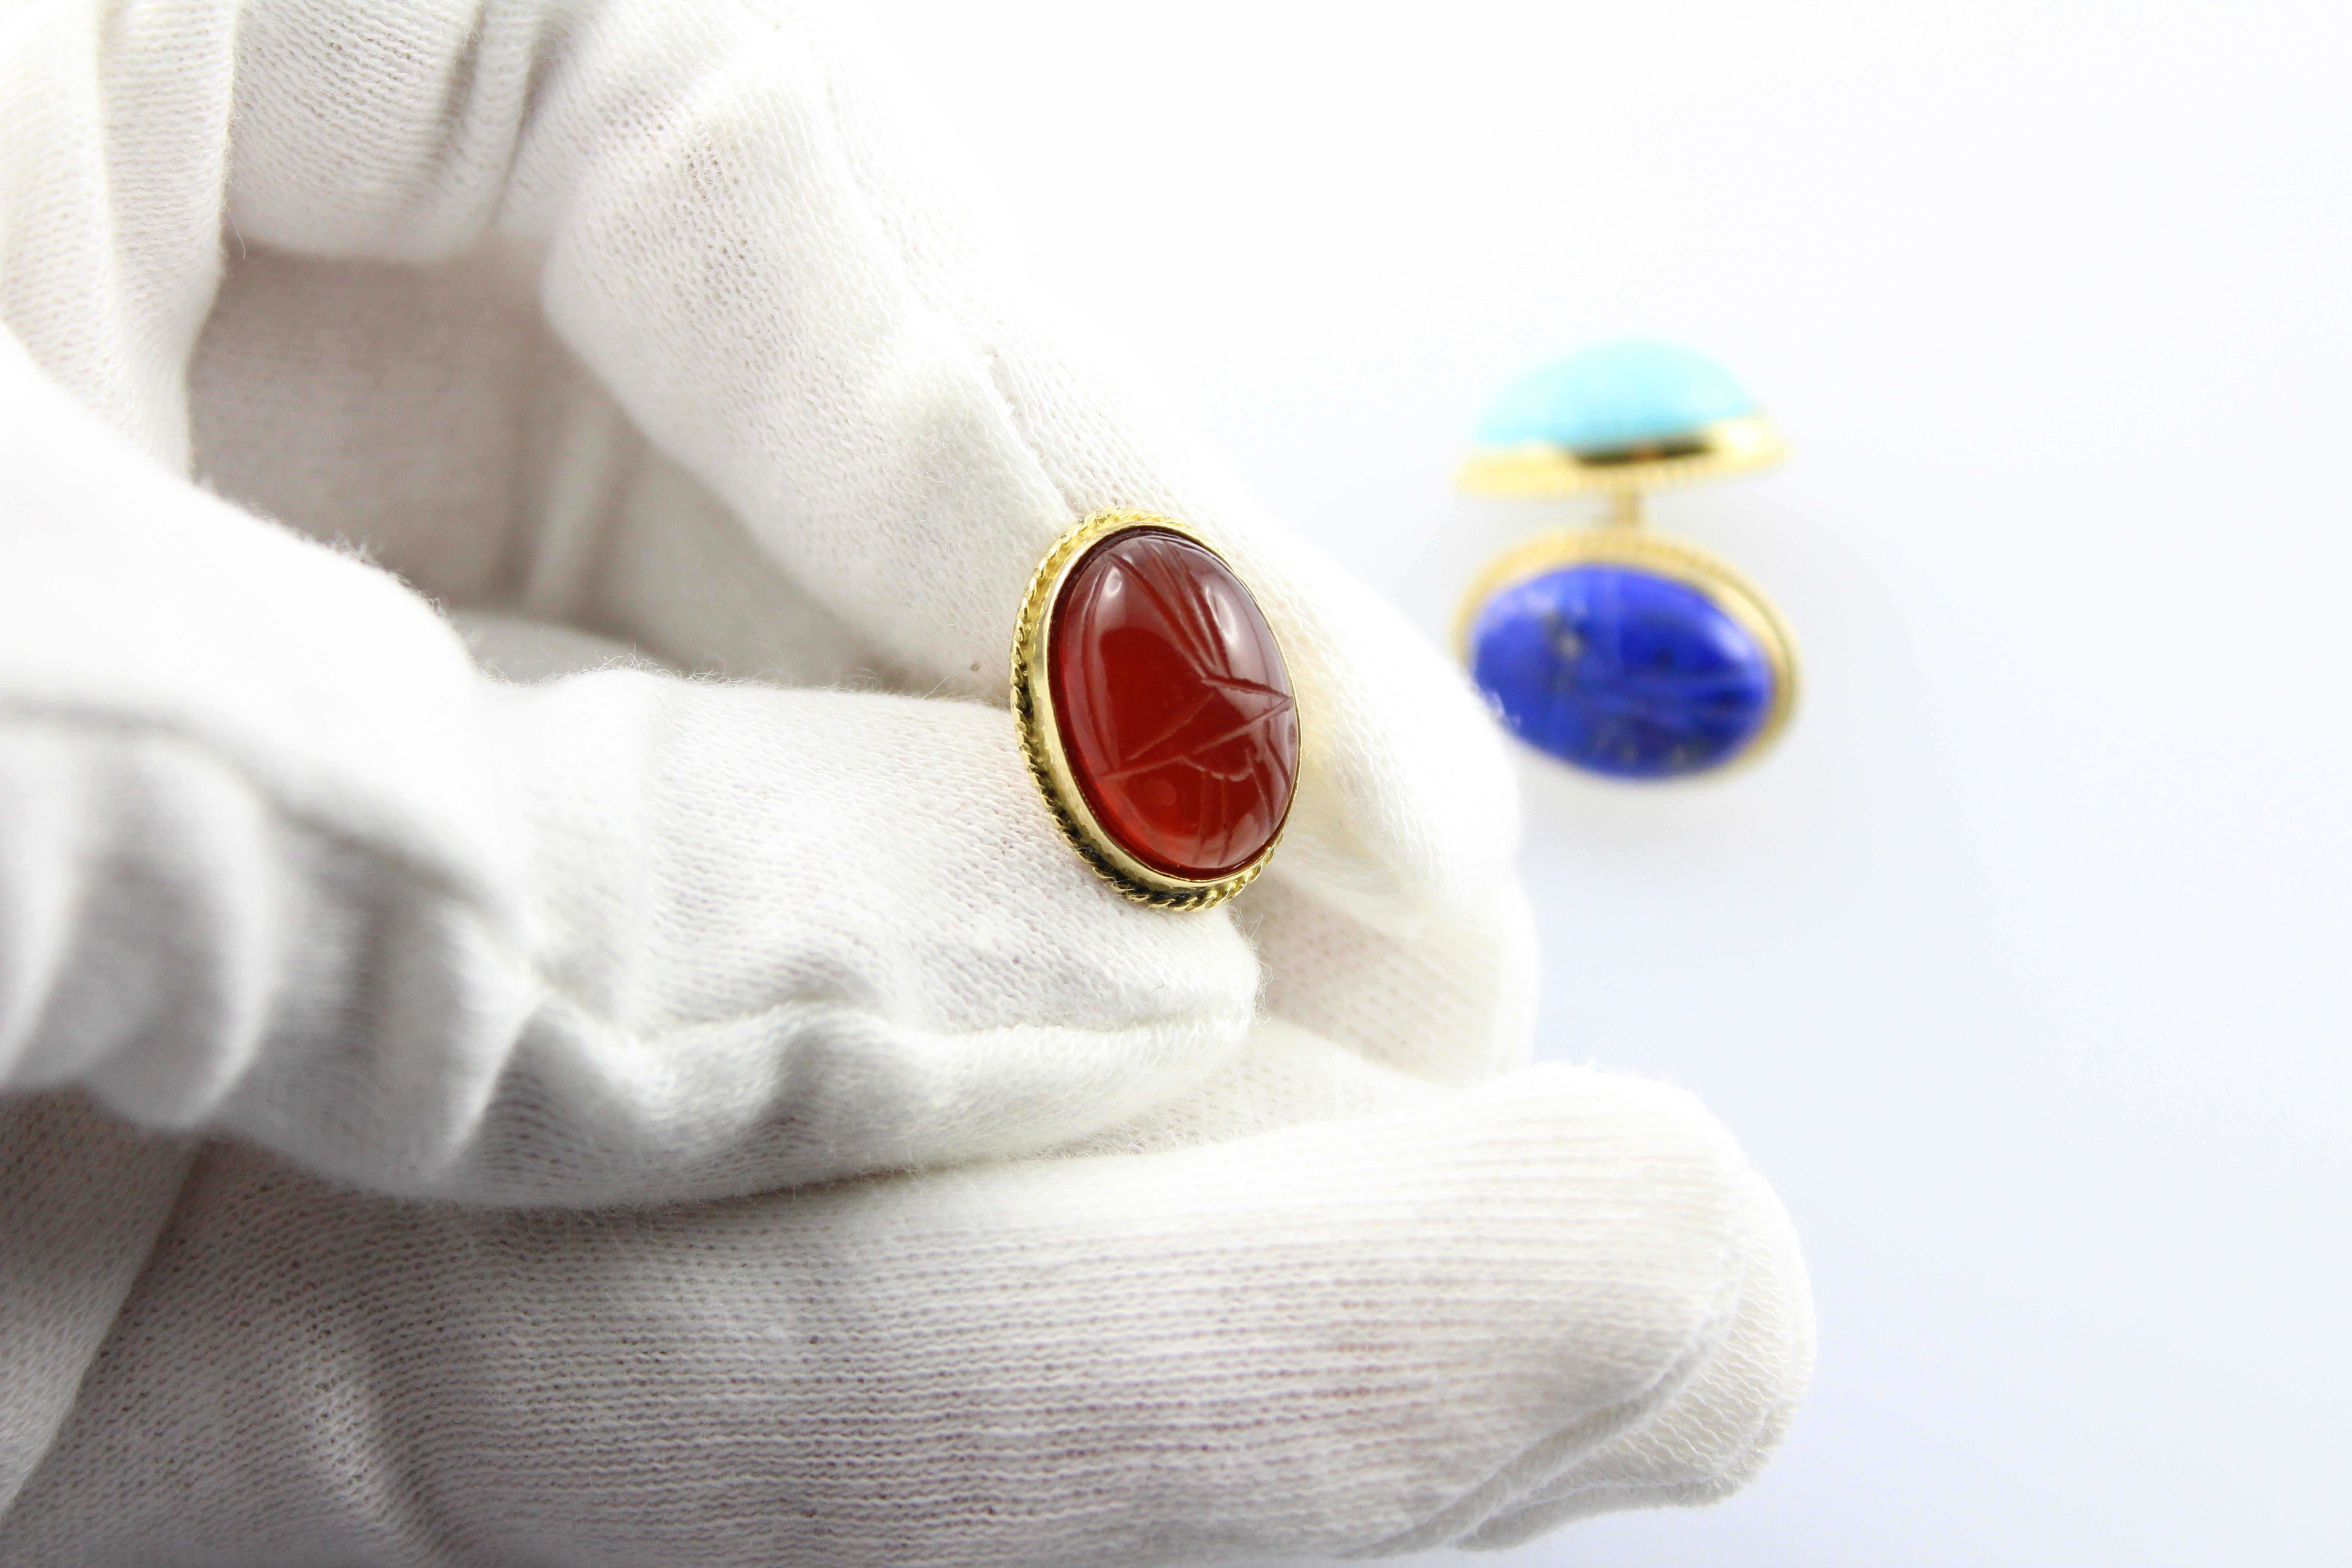 These cufflinks are created with fours hand-carved beetles, one in  one in carnelian, one in lapis lazuli and one in green agate.
The mounting is in 18 karat yellow gold.

It is also possible have them with all the four beetle in the same stone or